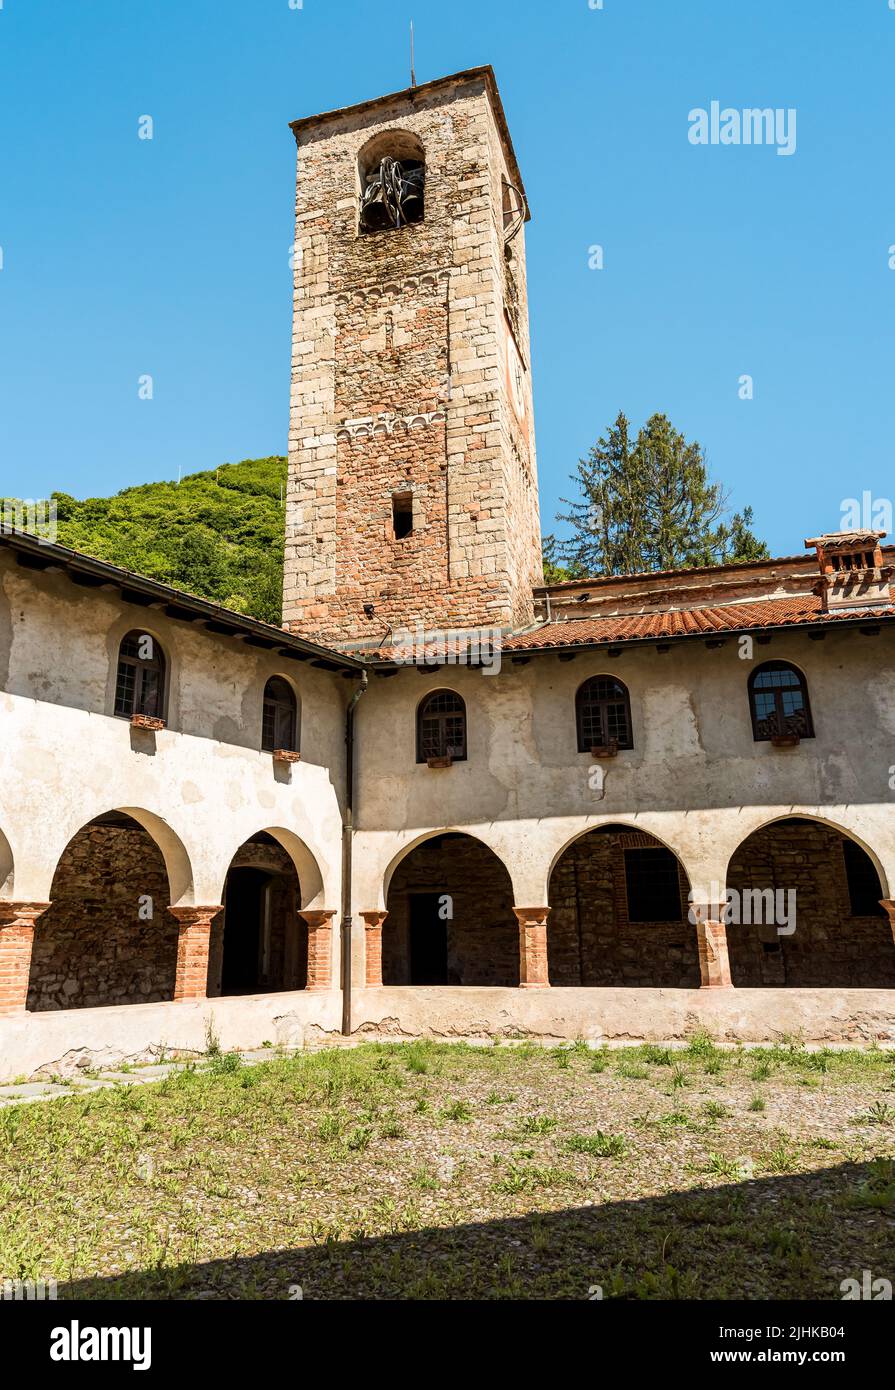 Courtyard with Bell Tower of the Parish Museum of the Abbey of Saint Gemolo in Ganna, Valganna, province of Varese, Italy Stock Photo